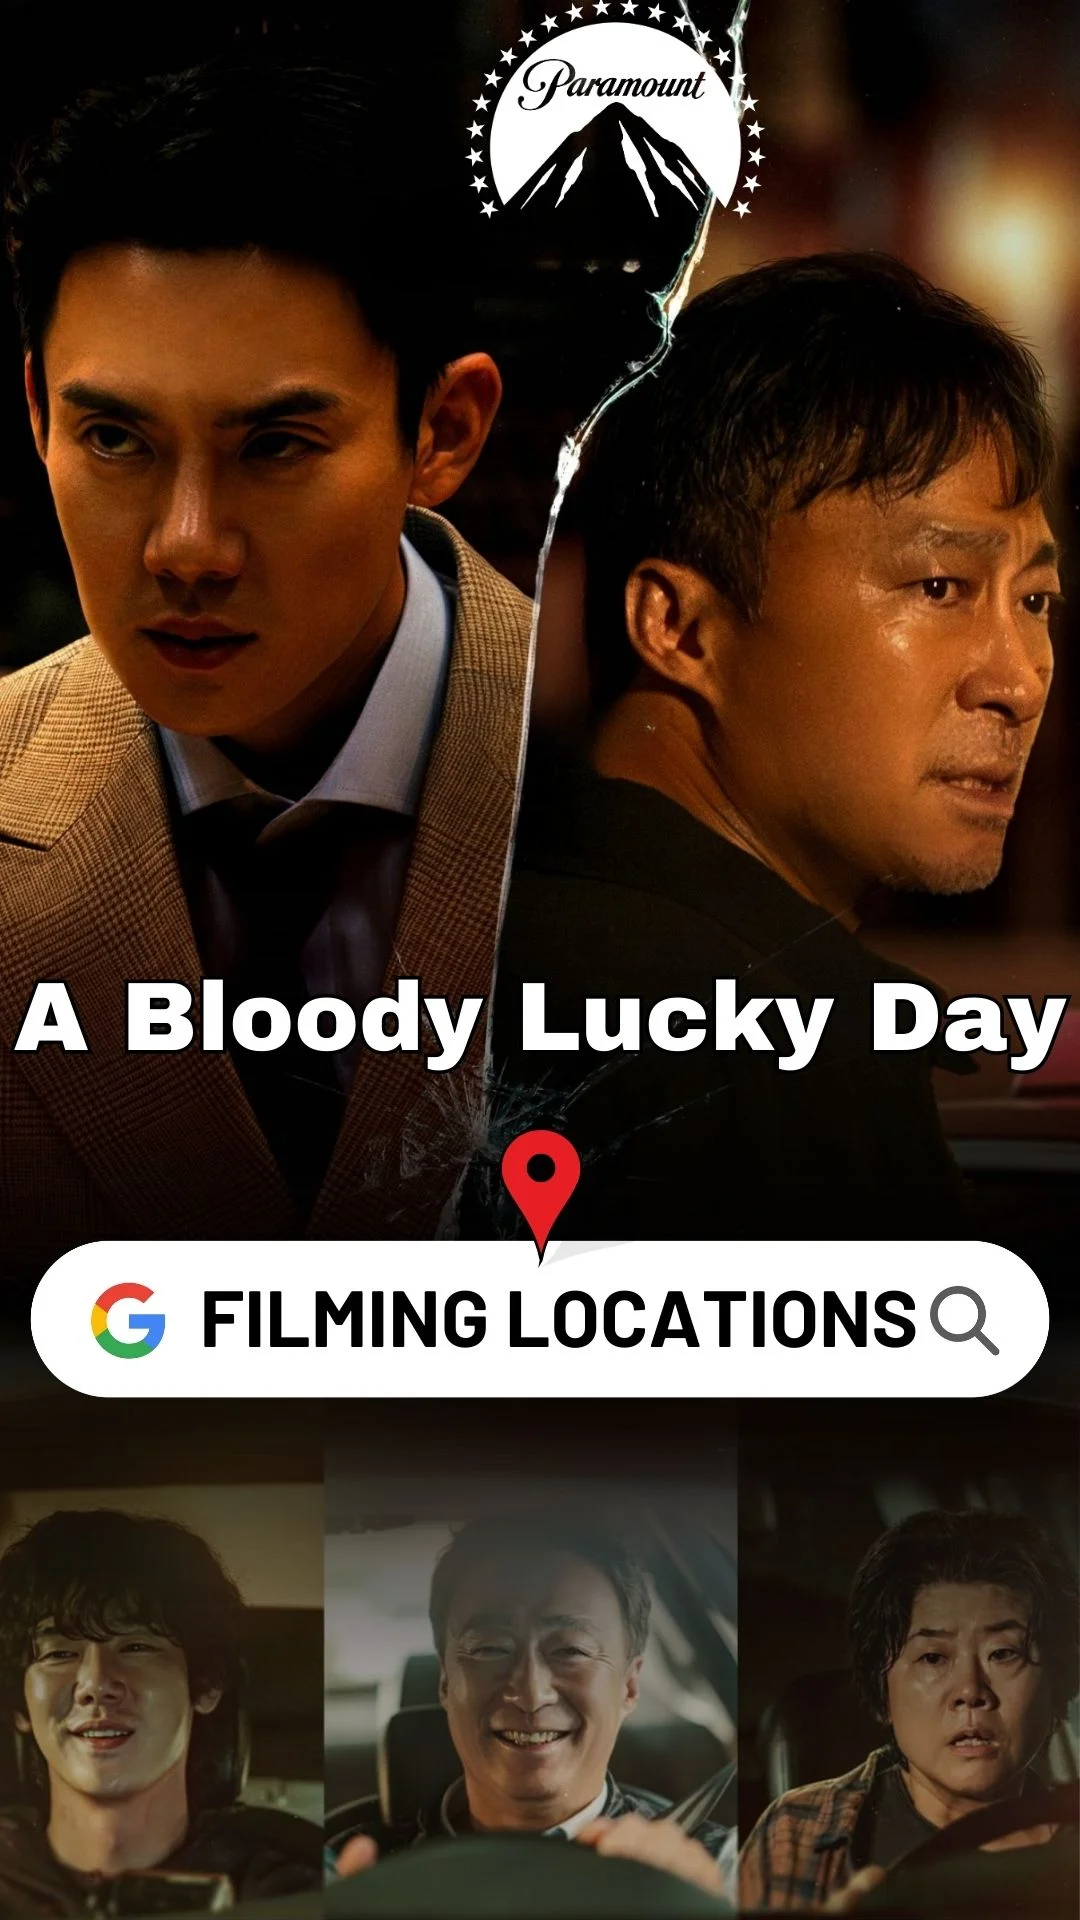 A Bloody Lucky Day Filming Locations